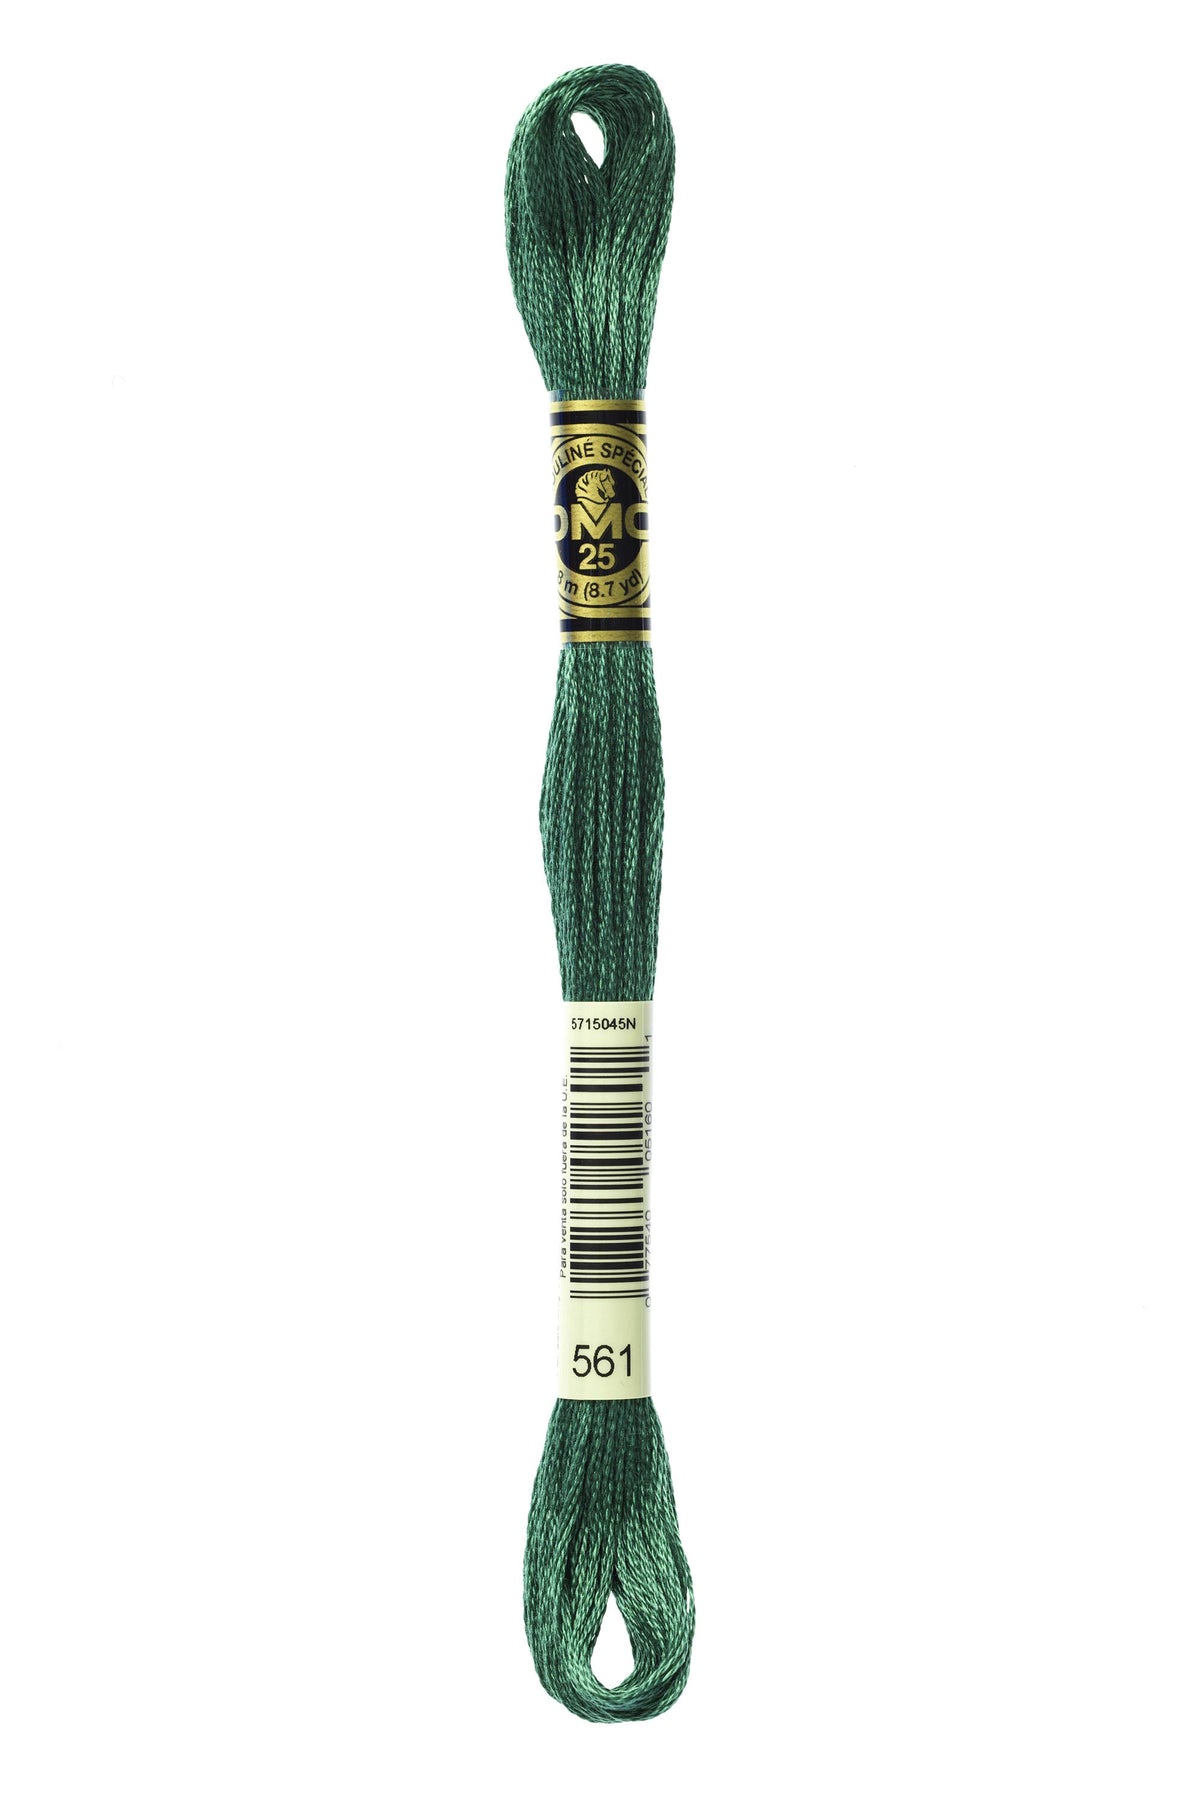 Cotton Six Stranded Embroidery Floss | DMC 326-703